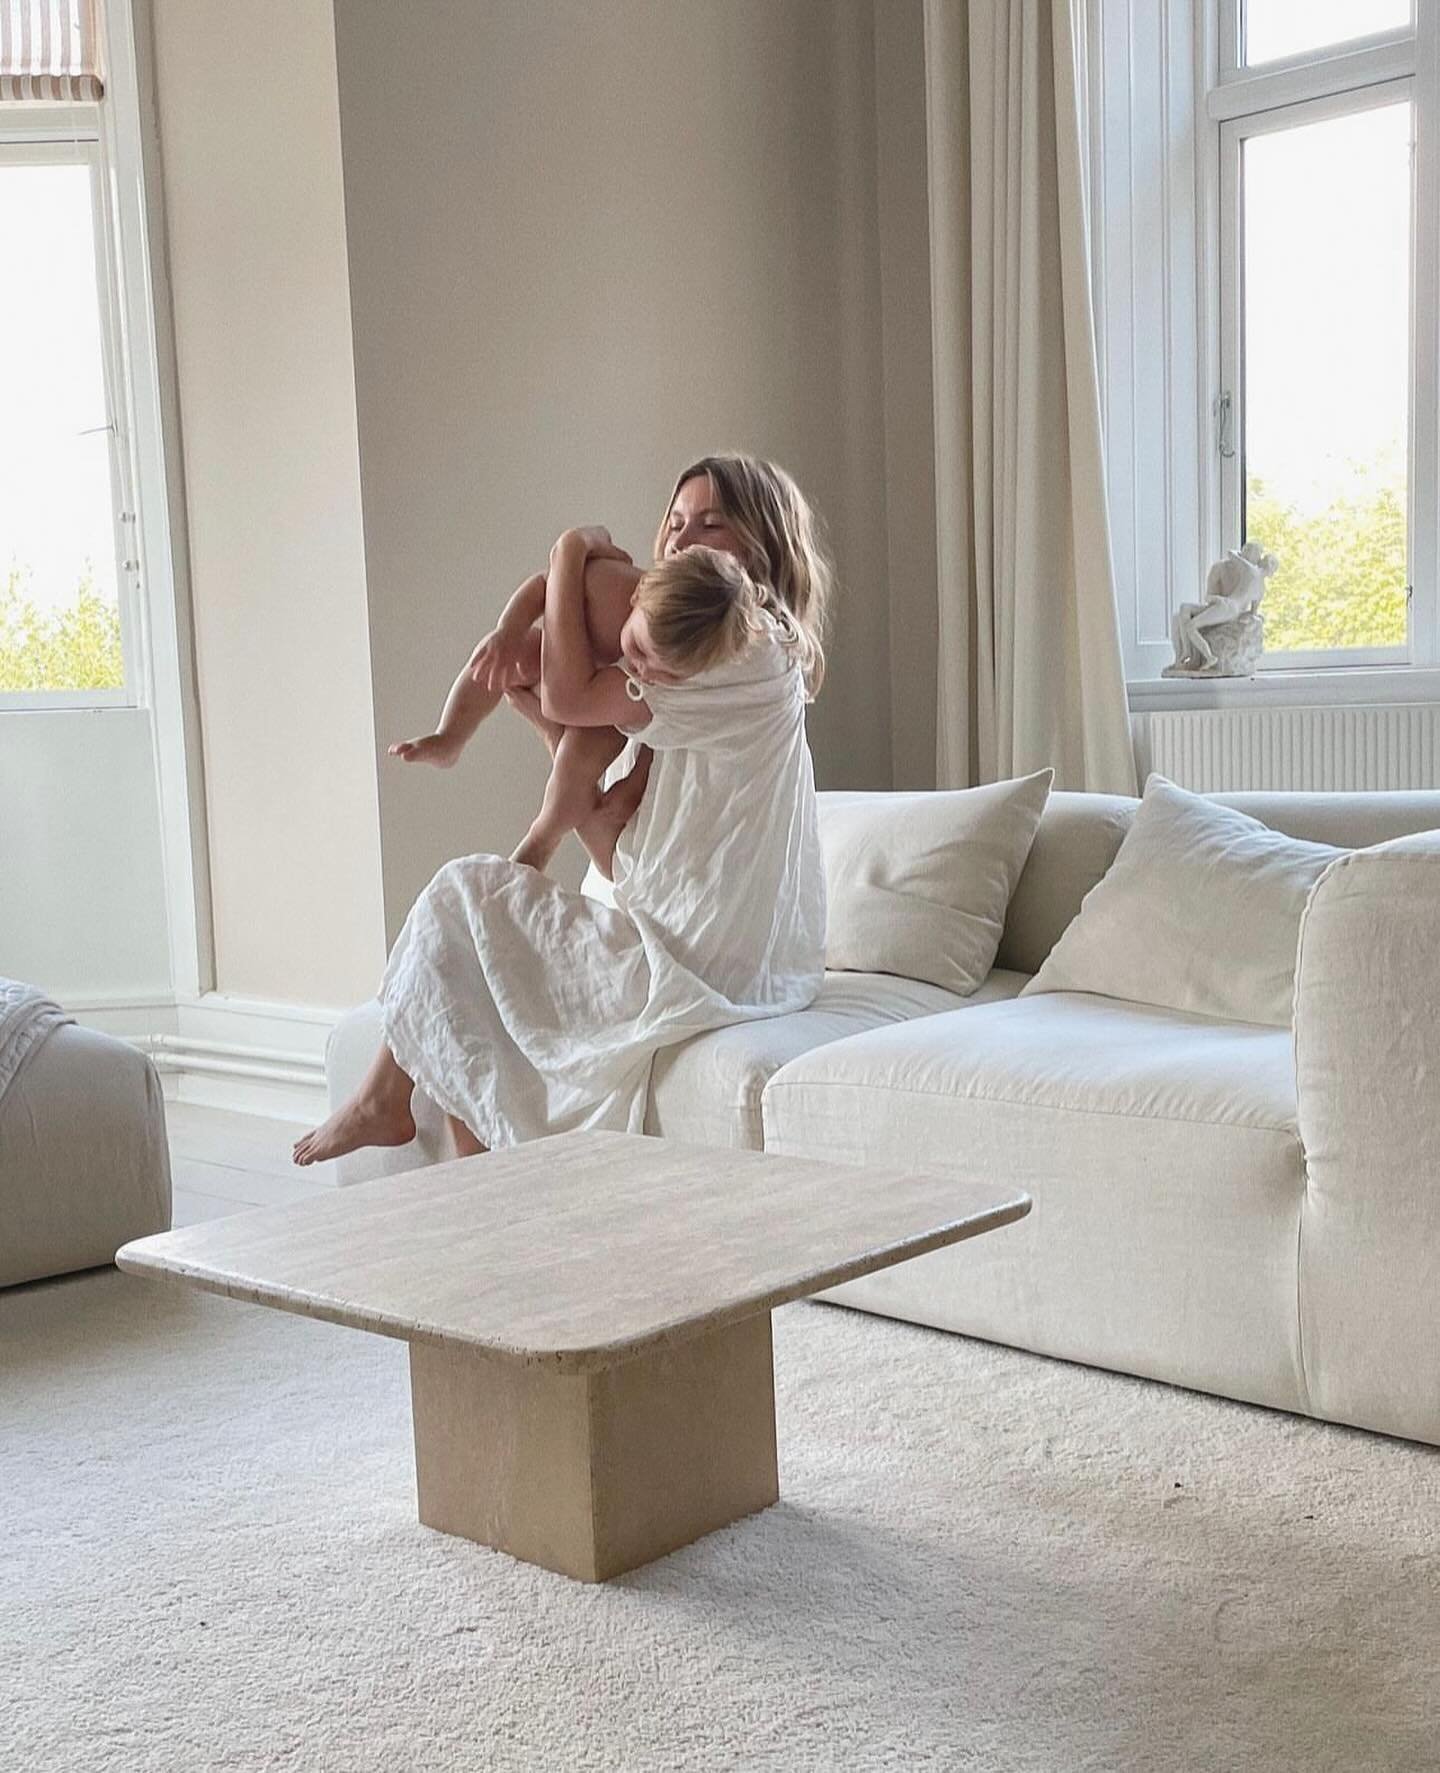 VV l Happy Mother&rsquo;s Day. May 12

Magazine: Architecture &amp; Design
Styling: Marie Graunboel
Home: Anna Engstrom

#vvinteriorhome #interiordesign #interiorstylist #1stdibs #interiordesign #moderndesign #contemporarydesign